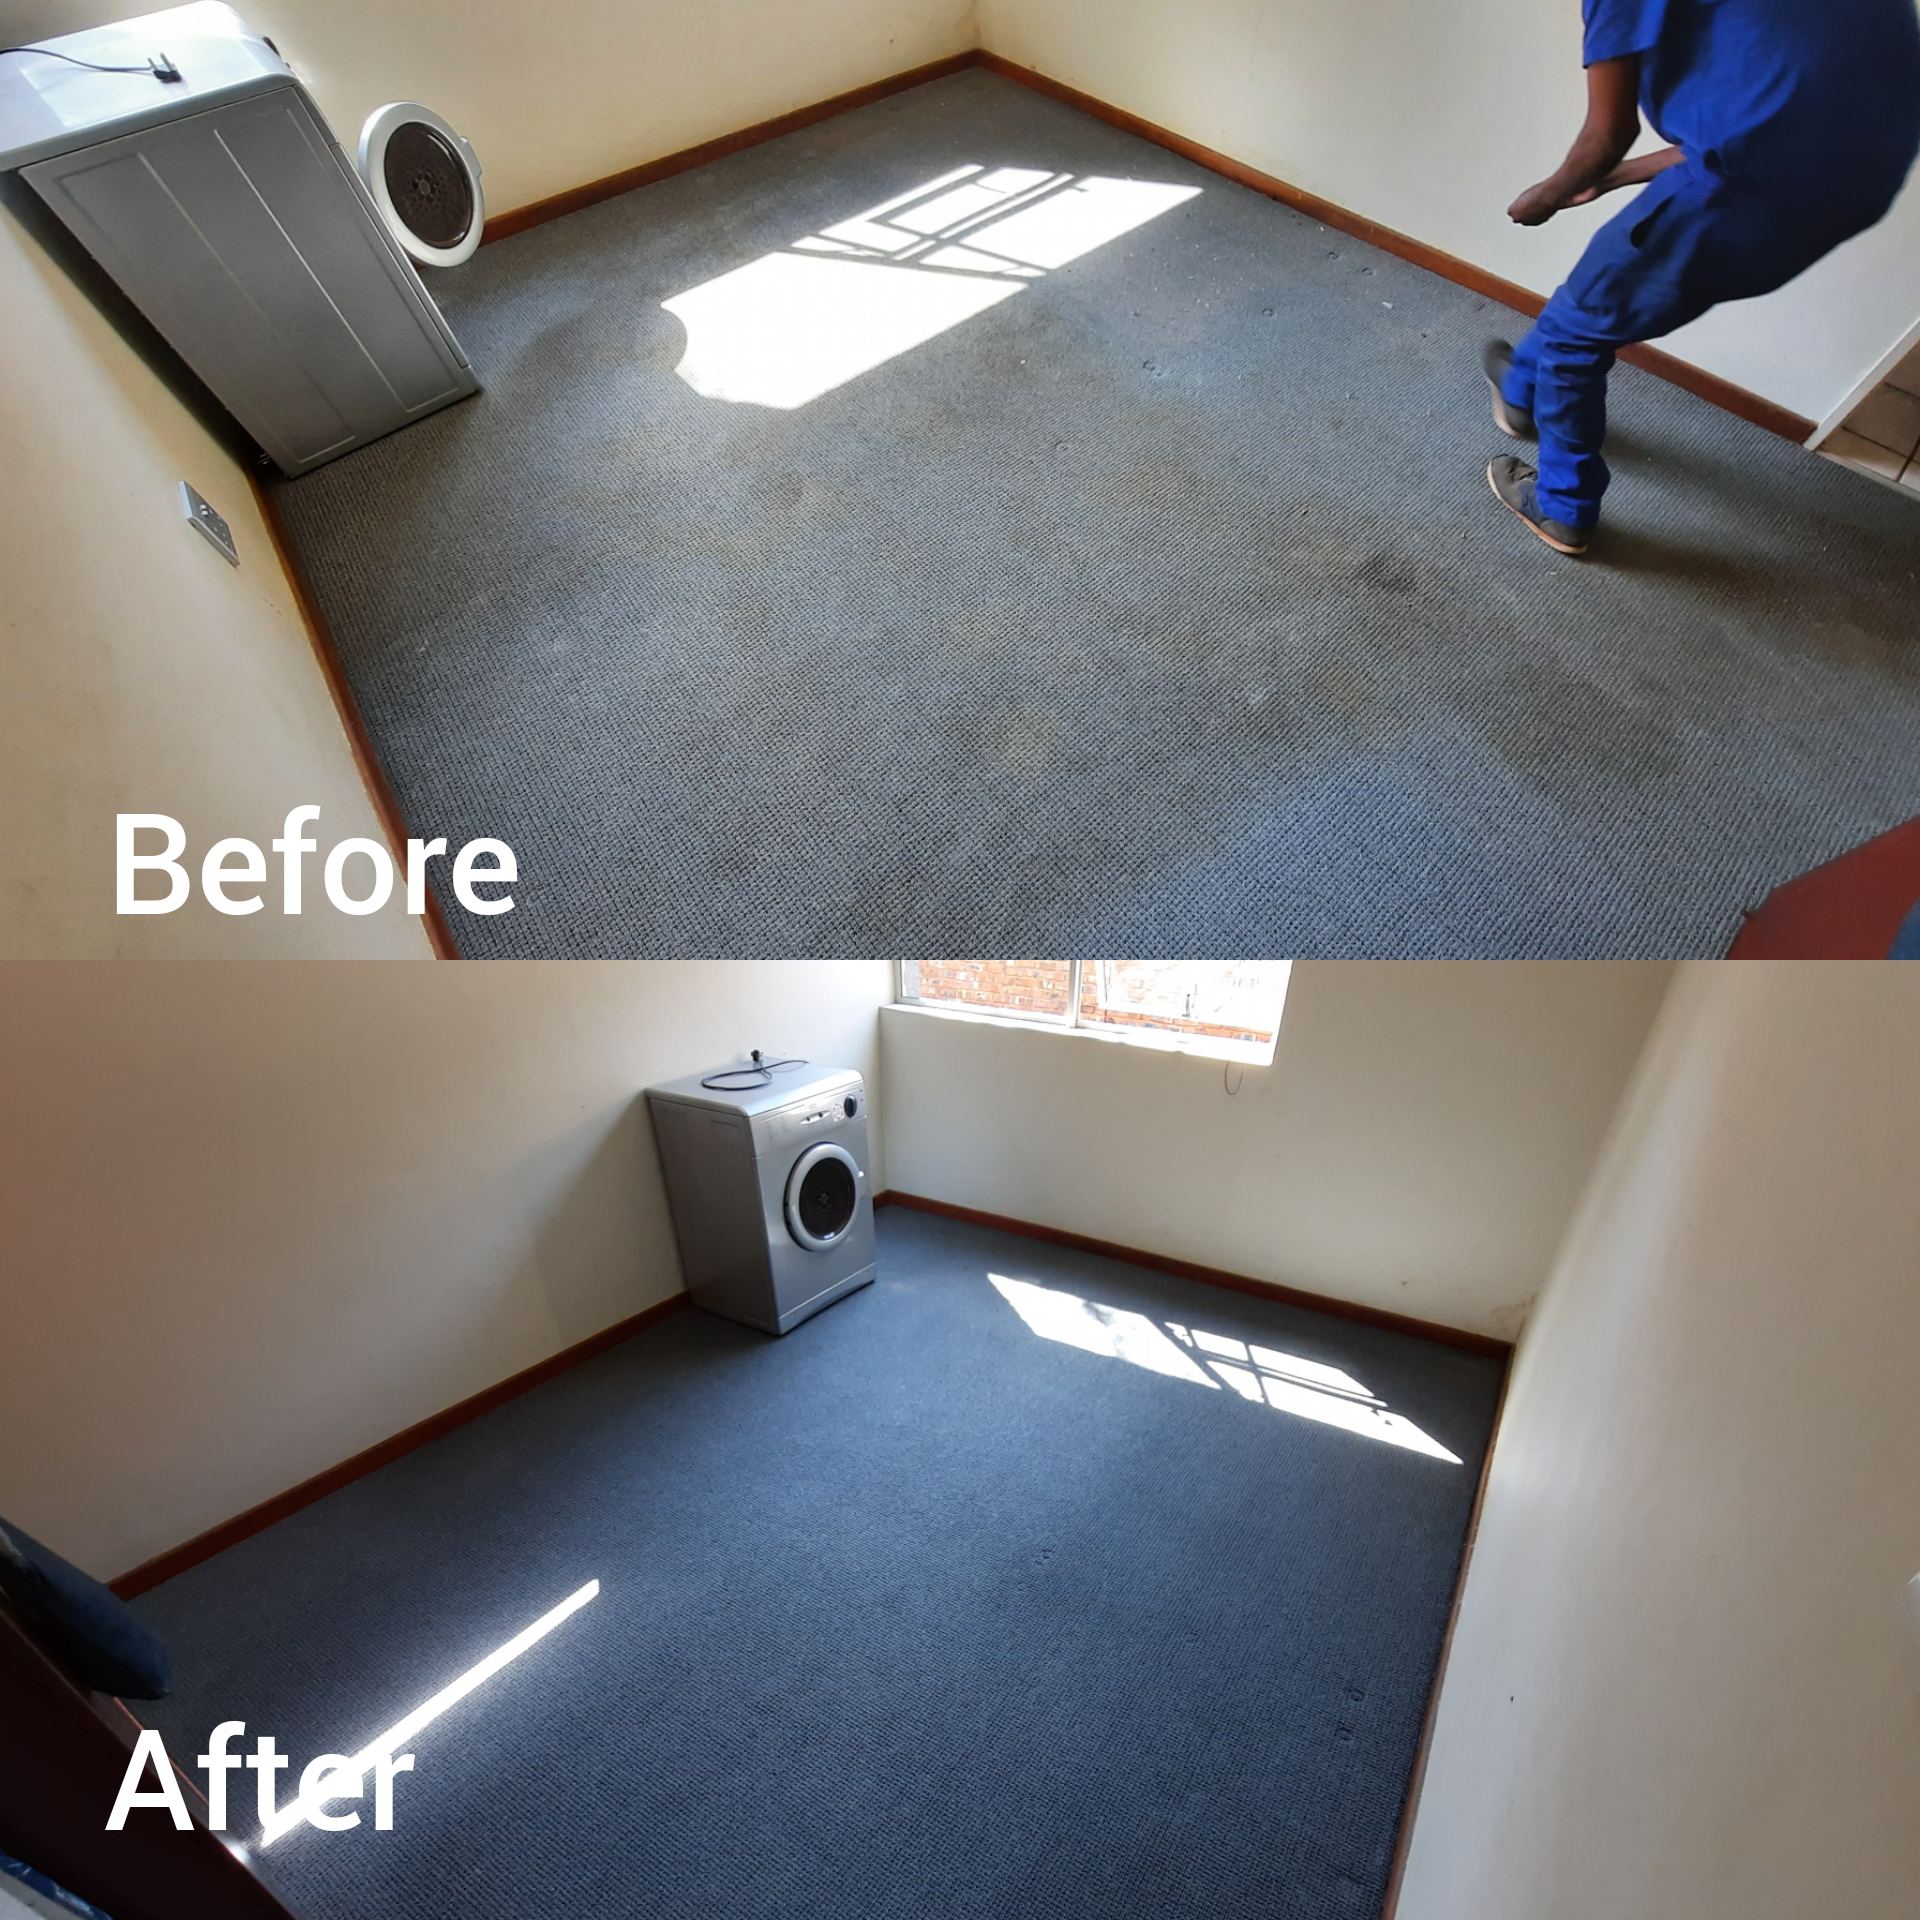 Professional carpet cleaning services Johannesburg